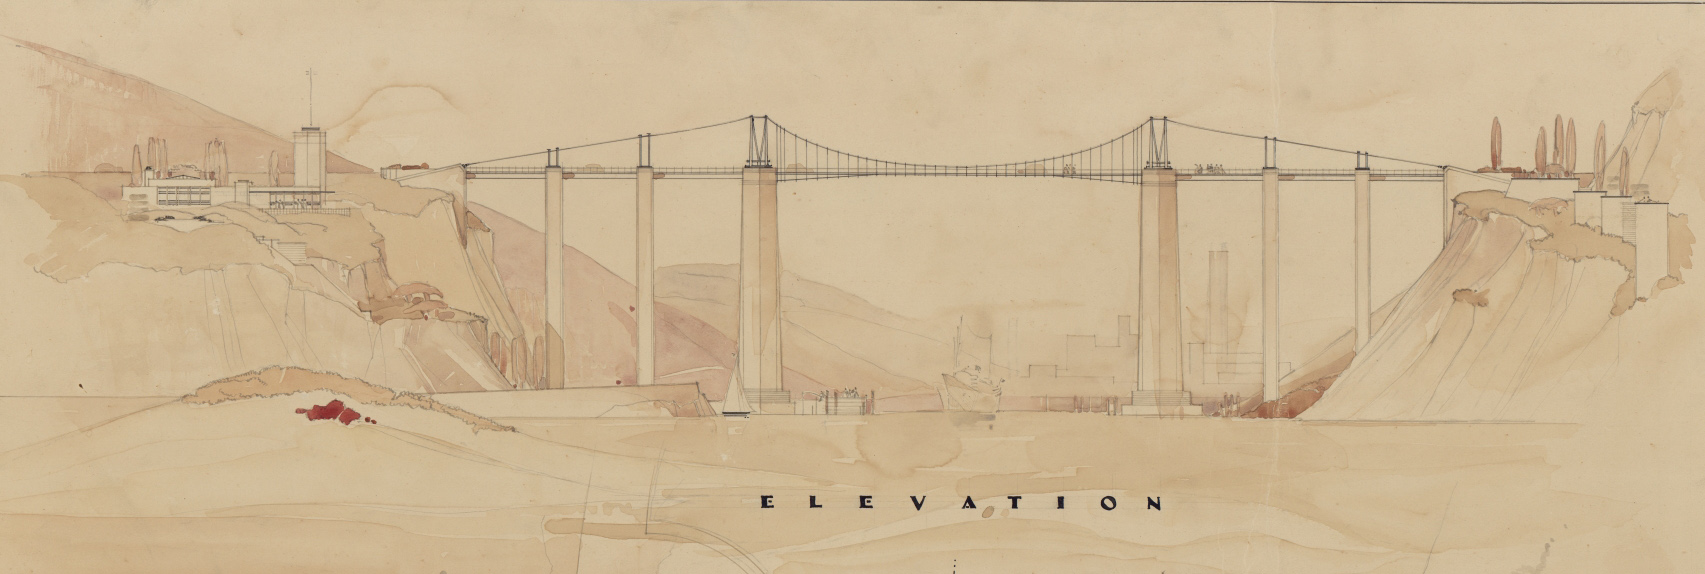 The image is a drawing of a monumental causeway crossing a large canyon. Drawing is from the Jessen and Jessen collection